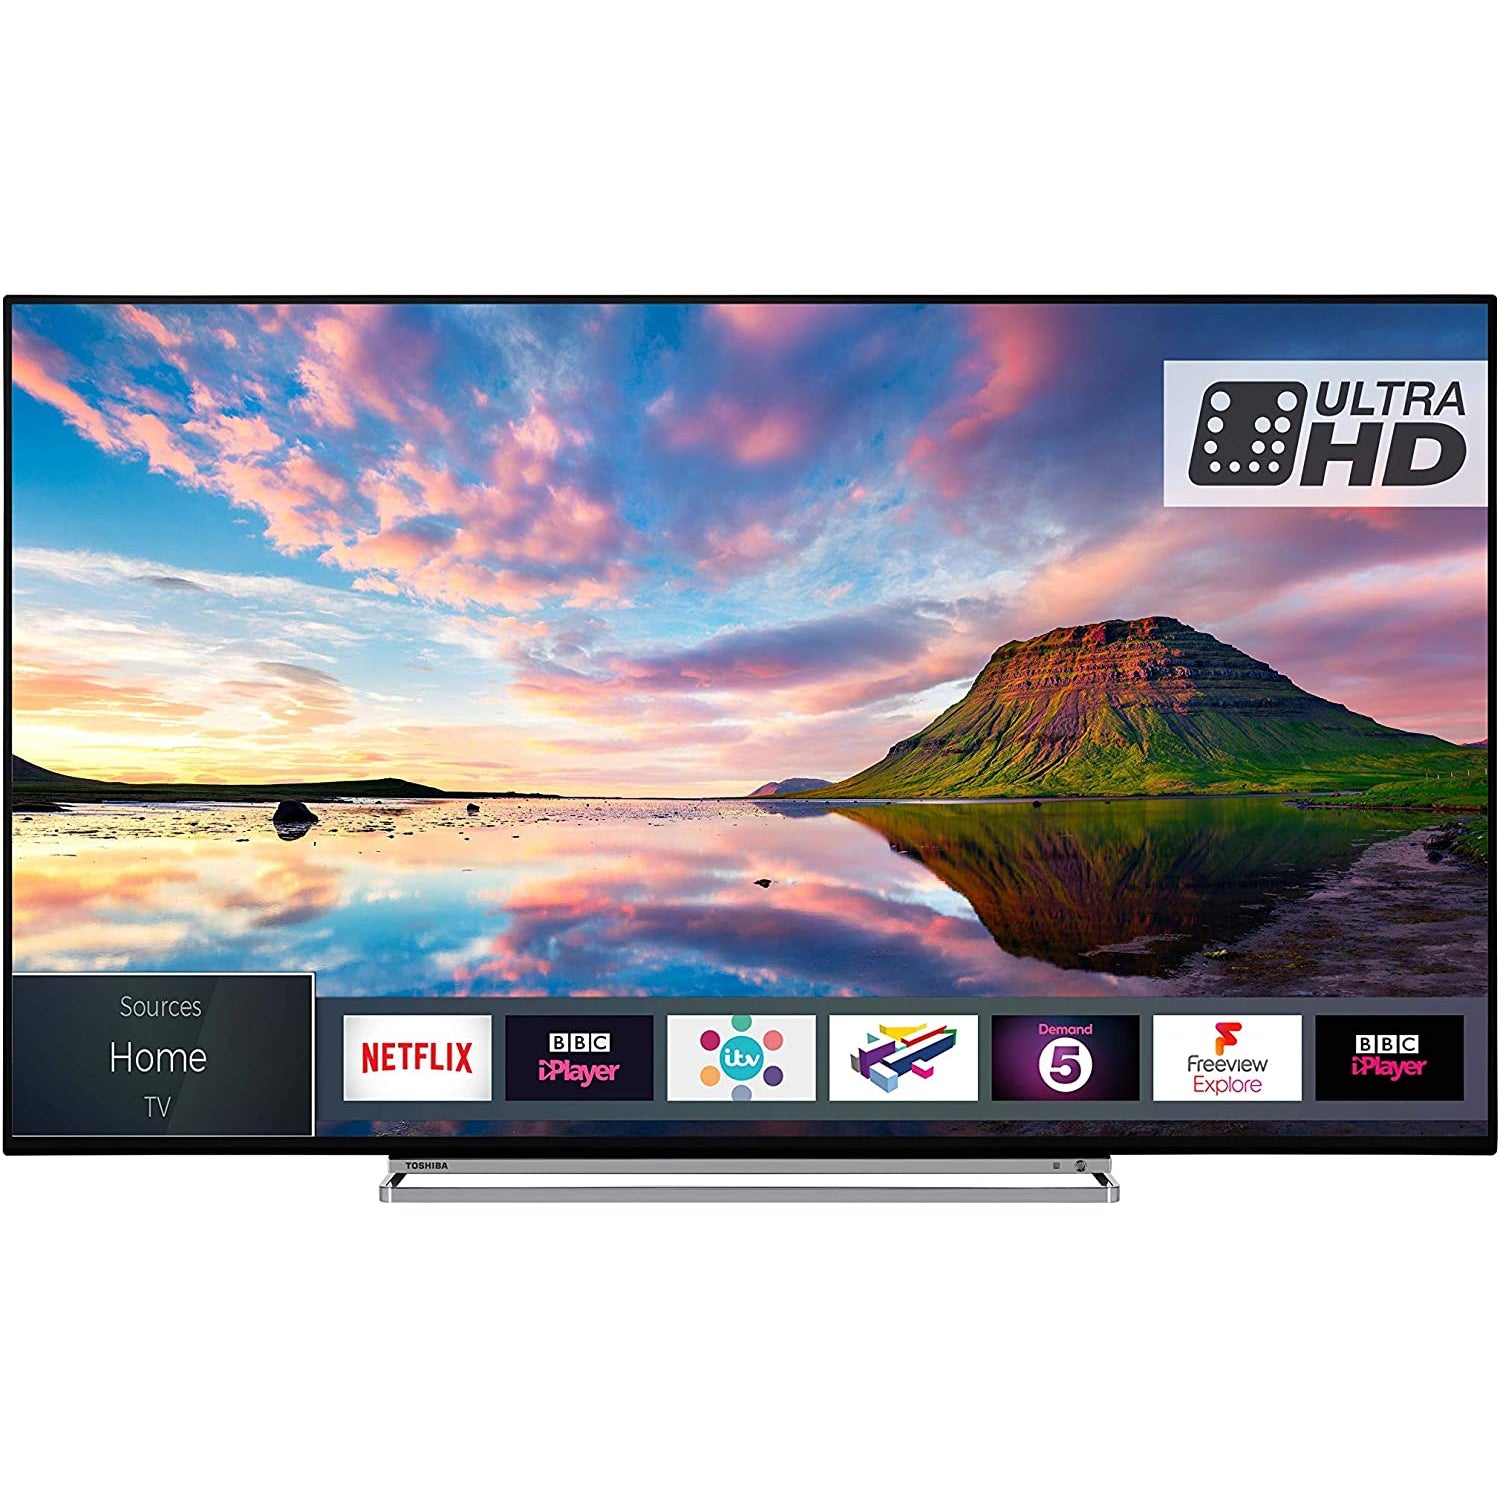 Toshiba 55U5863DB 55-Inch Smart 4K Ultra-HD HDR LED WiFi TV with Freeview Play- Black/Silver